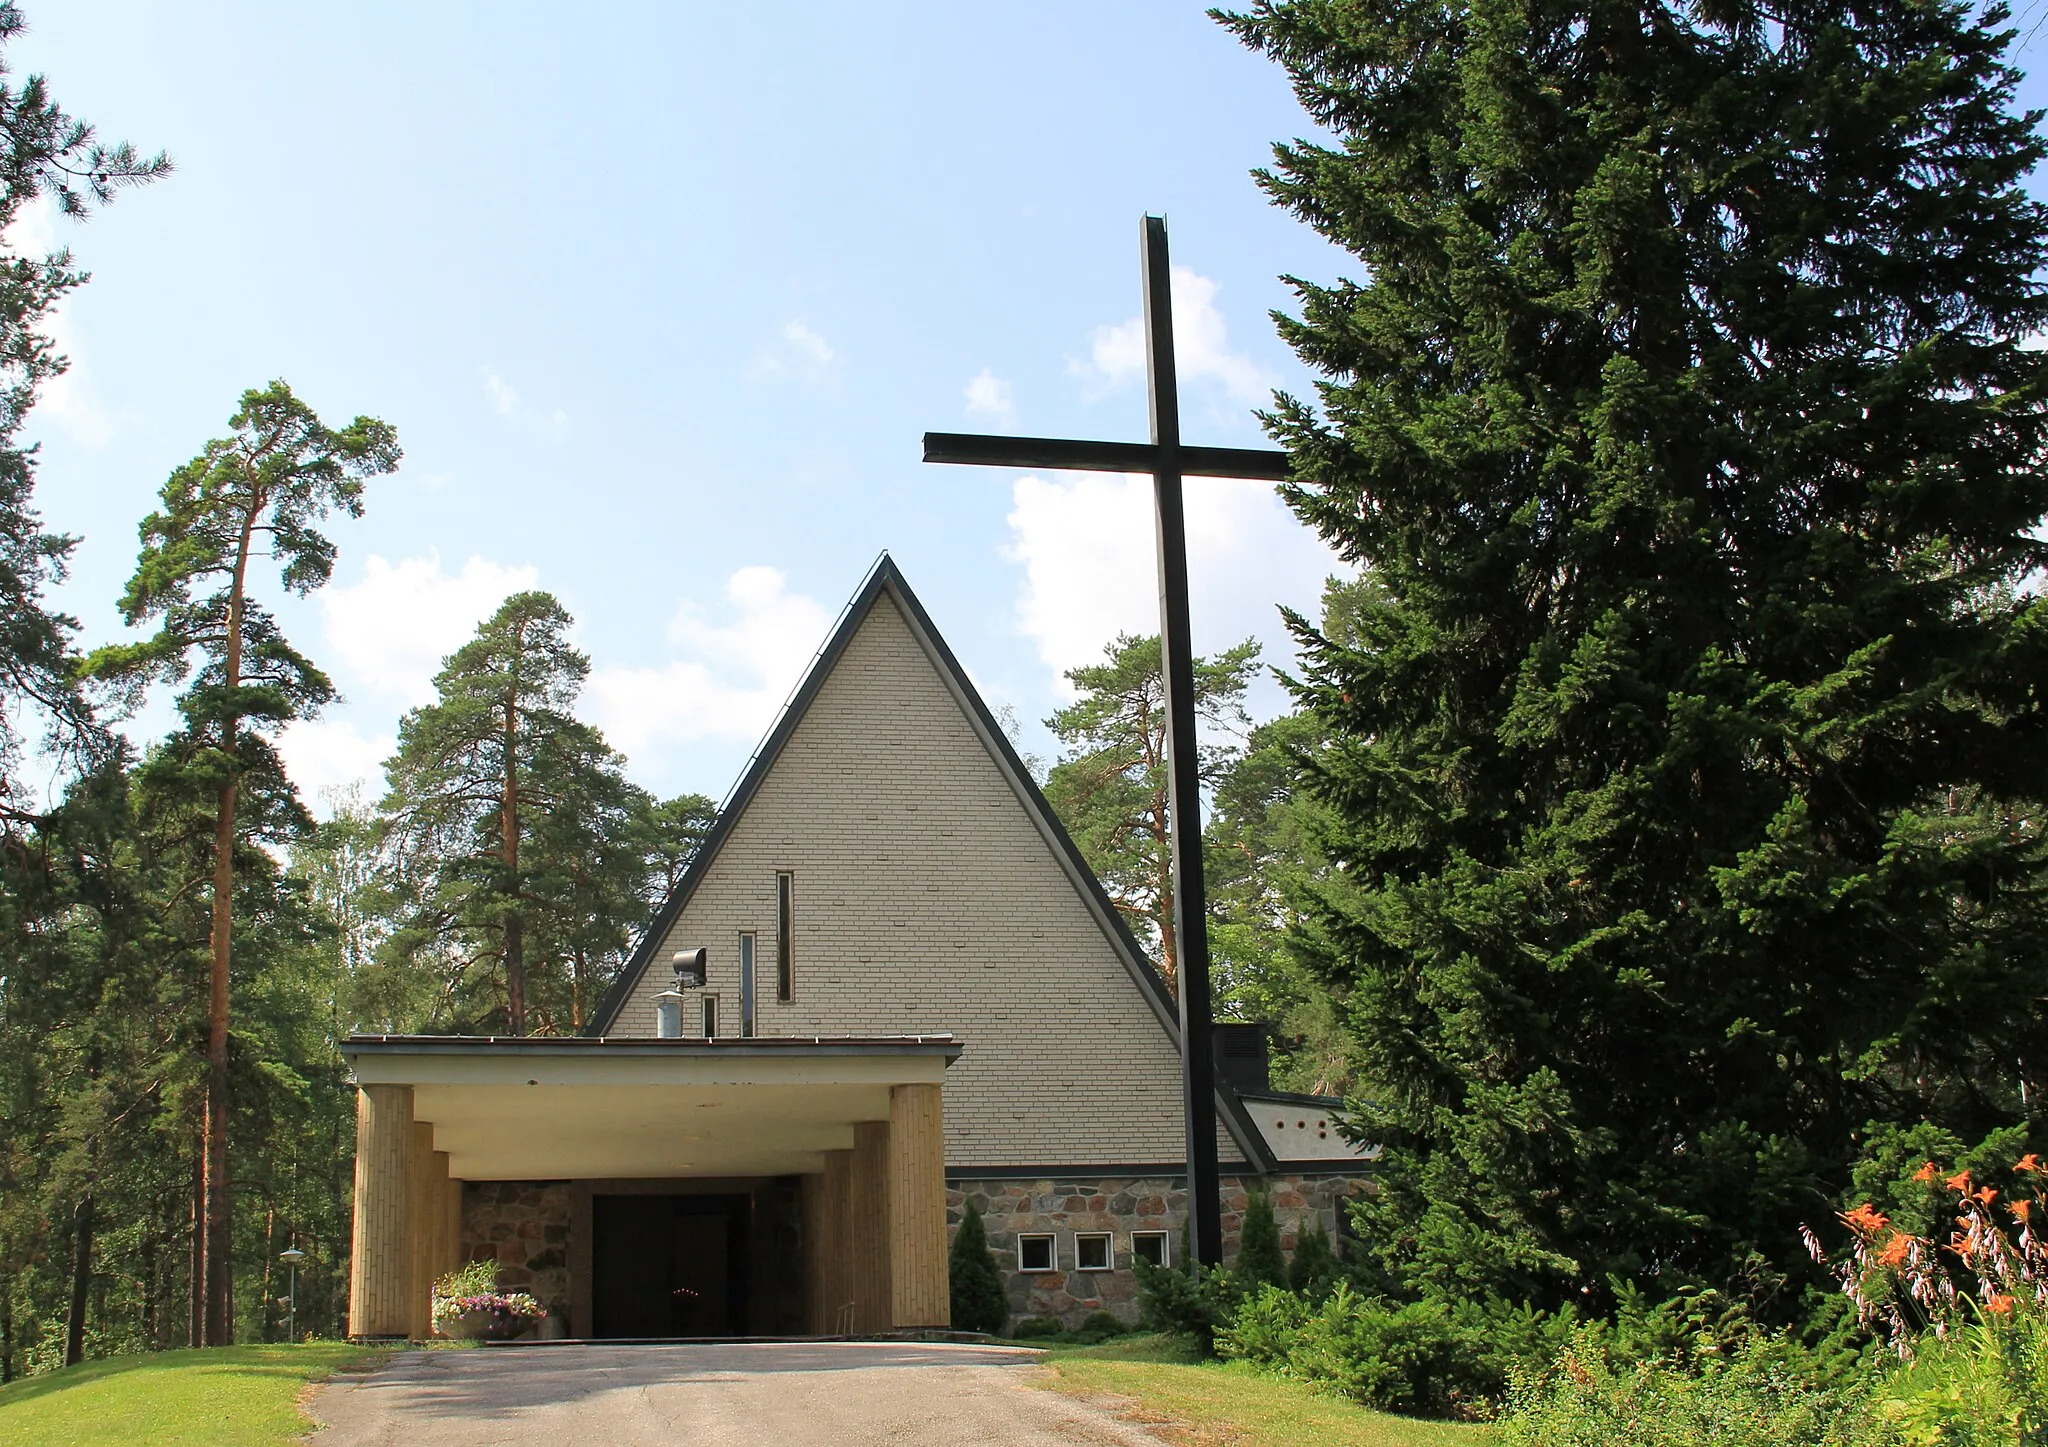 Photo showing: Ristikangas Chapel in Ristikangas Cemetery, Lappeenranta, Finland. The chapel was designed by architect Erik Bryggman and completed in 1957.- Main entrance.